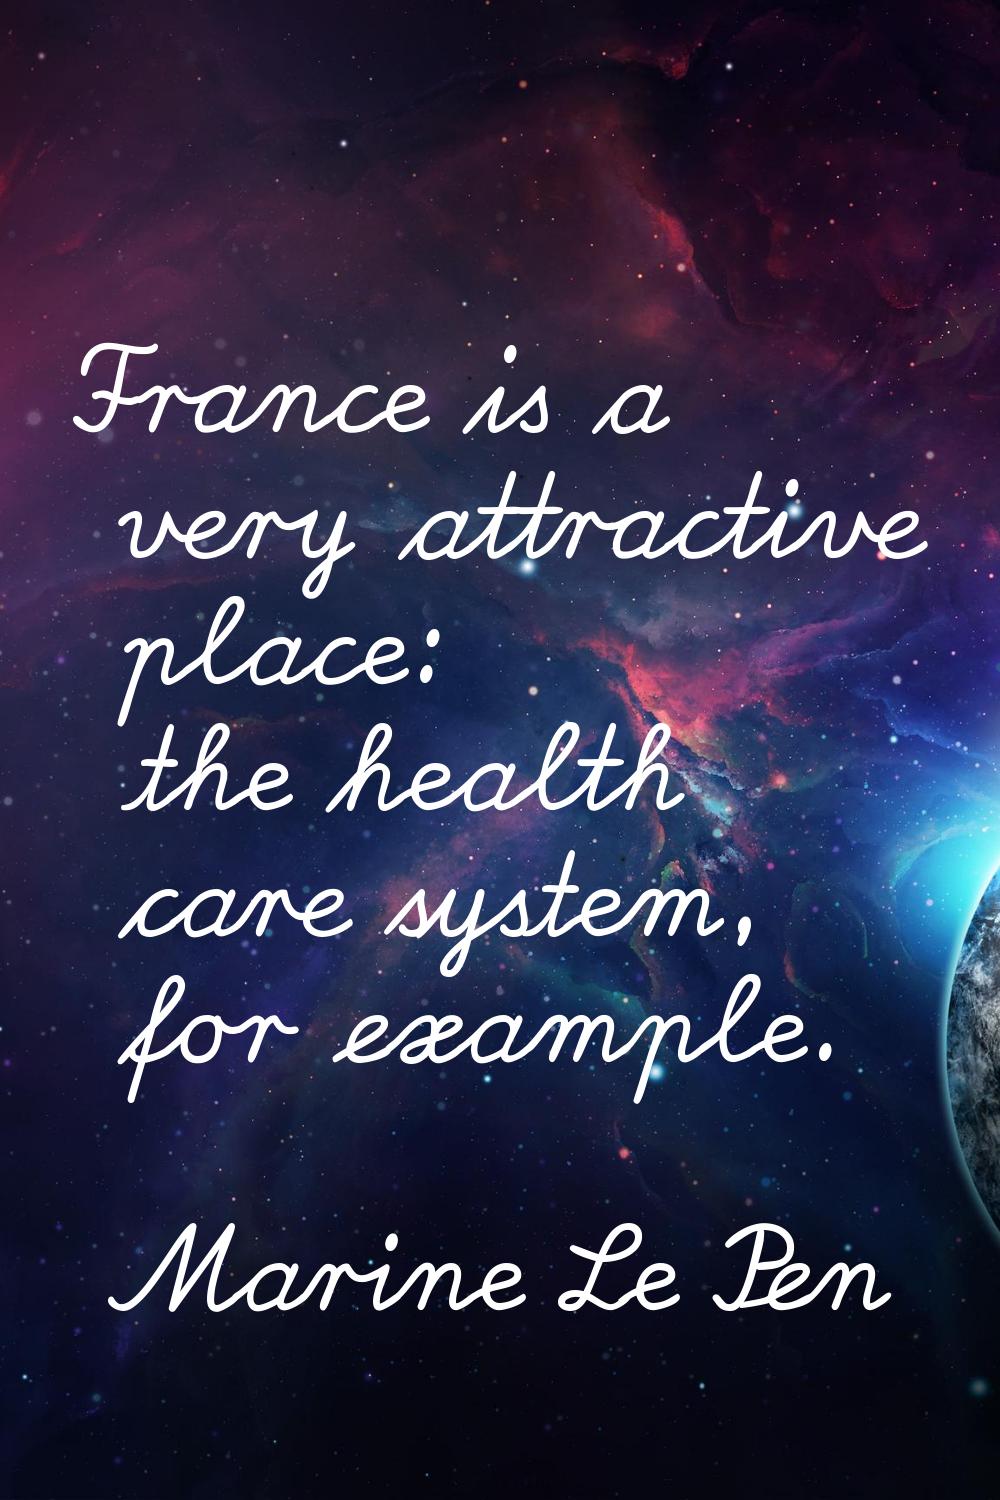 France is a very attractive place: the health care system, for example.